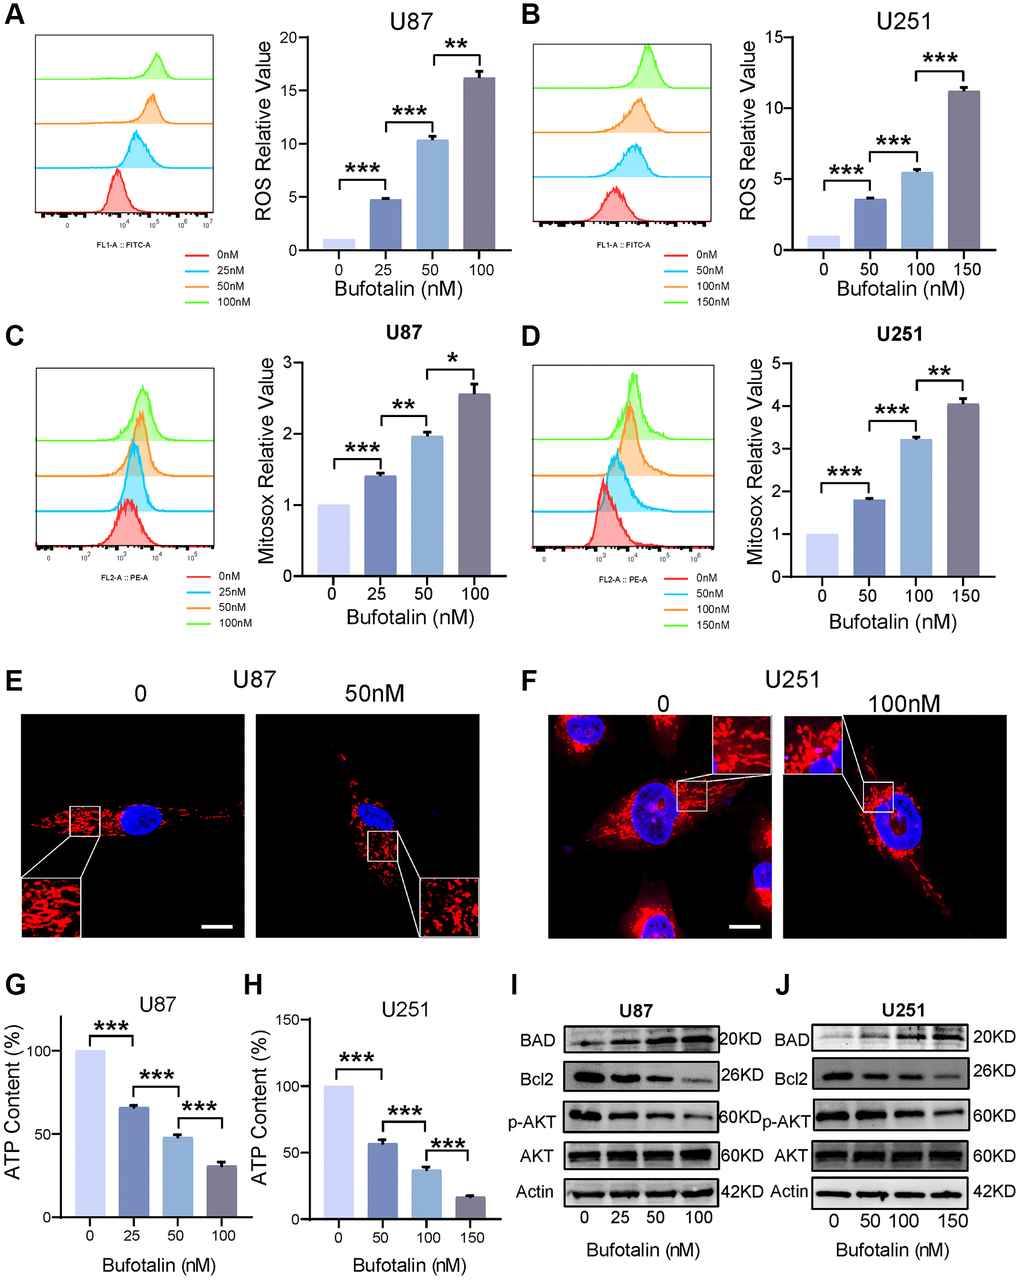 Bufotalin promoted mitochondrial dysfunction by increasing ROS and decreasing the phosphorylation of AKT. (A, B) ROS quantification was determined by flow cytometry using the H2DCFDA. (C, D) mitoROS quantification was determined by flow cytometry using the MitoSox. (E, F) Mitochondrial morphology was determined by Mito tracker using the confocal. (G, H) Decrease in ATP levels with increasing bufotalin concentration. (I, J) The expression levels of Bcl2, BAD, AKT and p-AKT were analyzed by western blot. Data are the mean ± SD of triplicate samples. Significant differences compared with the control are indicated by *p **p ***p 